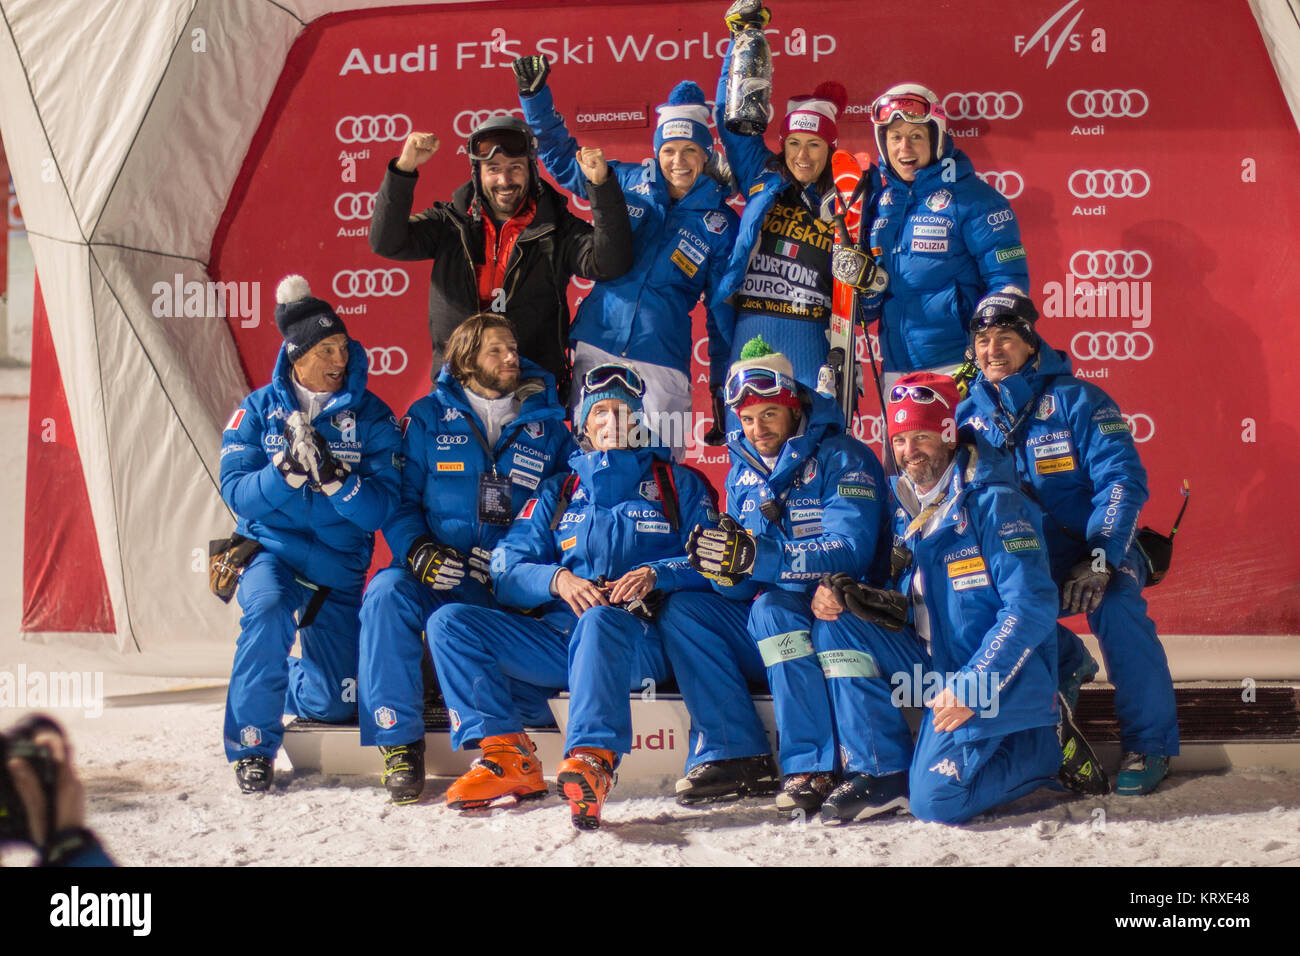 Italian Ski Team happy after the great podium results from Irene Curtoni and Manuela Moelgg in Courchevel Giant Slalom and Parallel slalom vaild for the Audi Fis Alpine Ski World Cup 2017 / 2018 Stock Photo